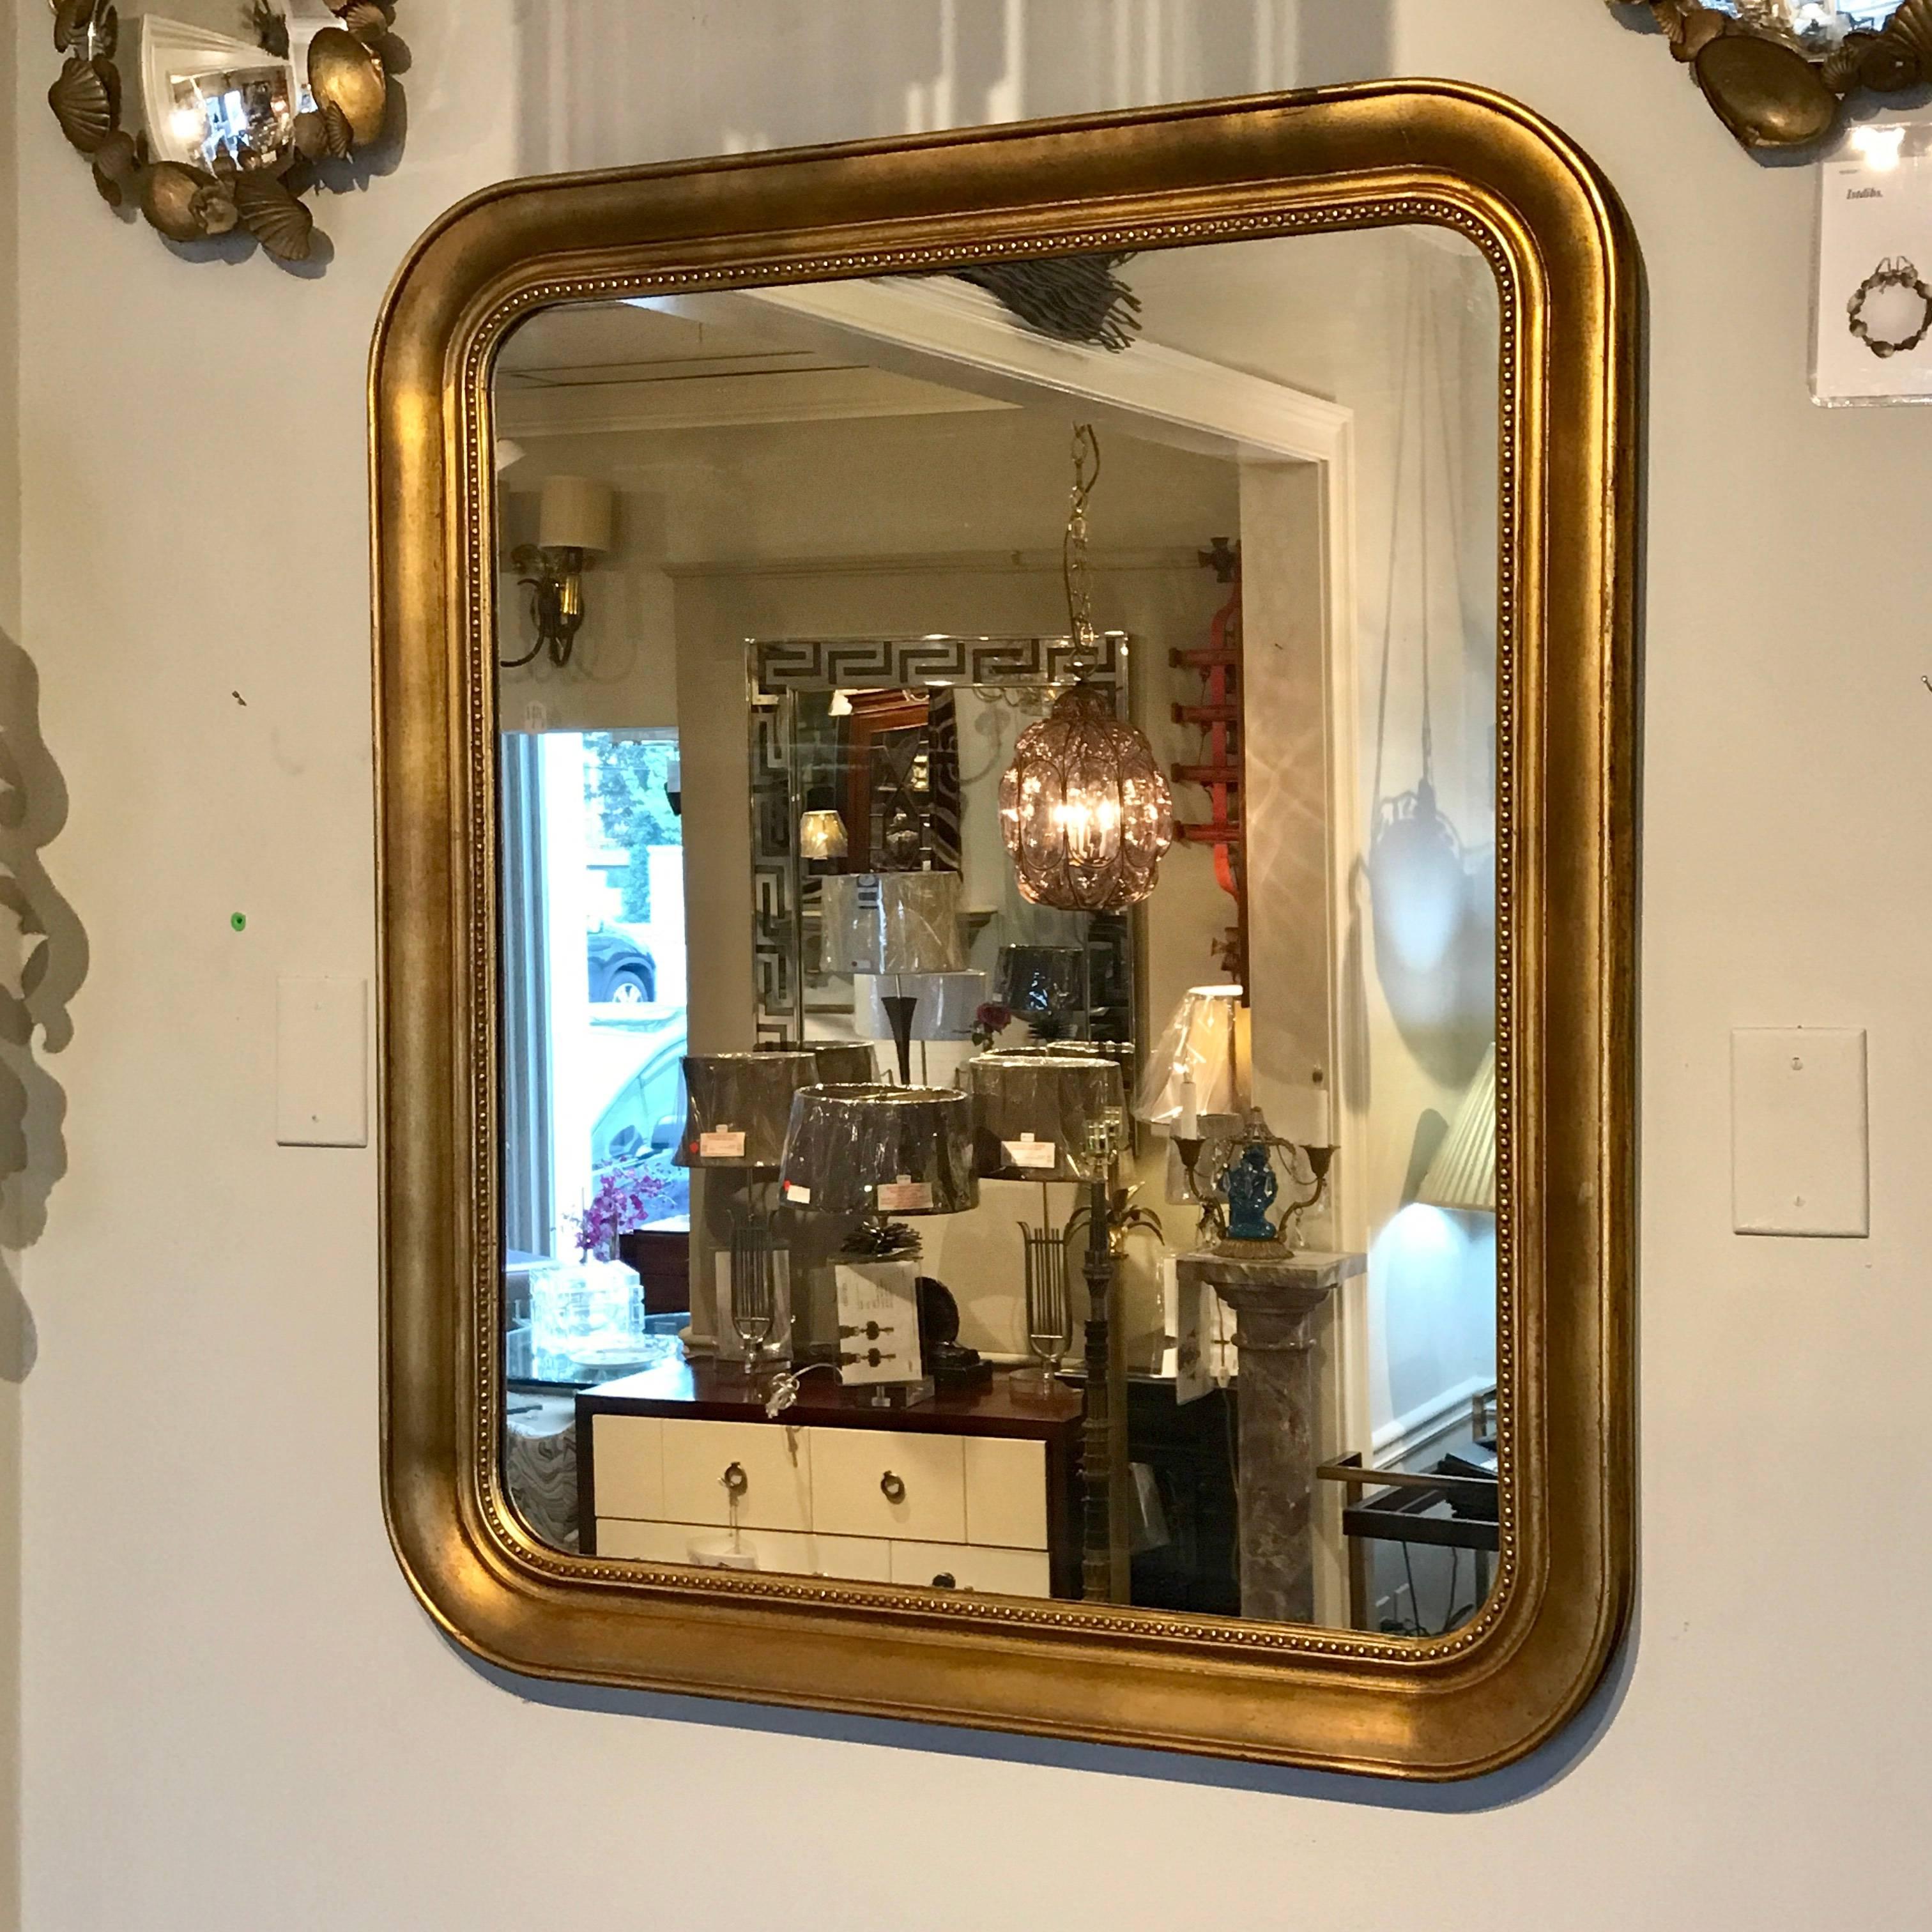 Louis Phillipe style giltwood squircle (square with rounded corners) mirror.